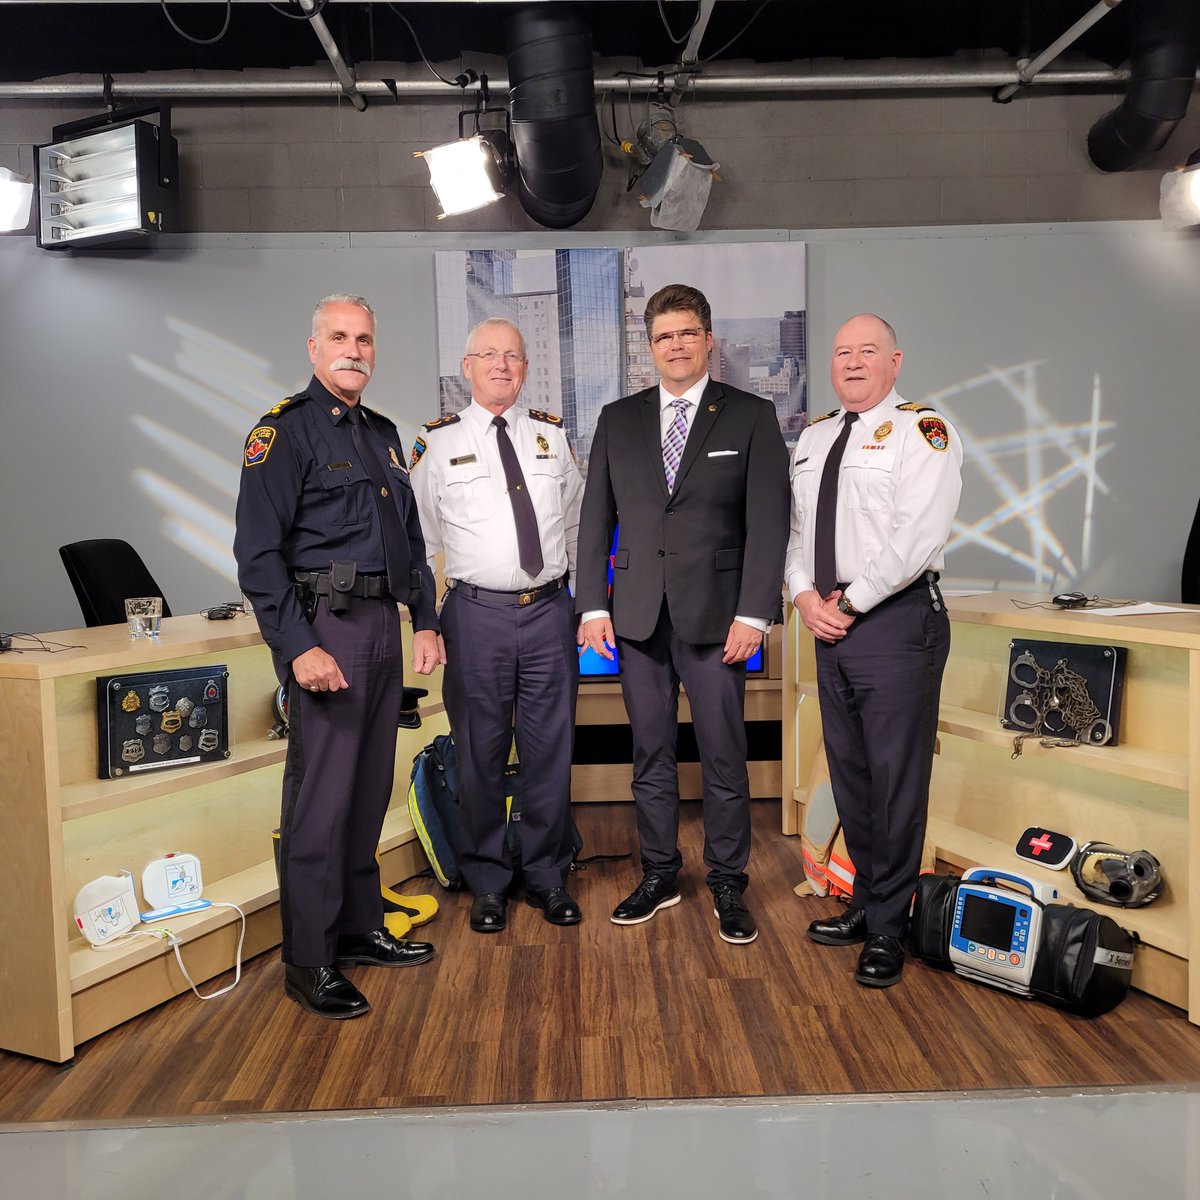 Great to have @HPS_Paramedics Chief Sanderson @HamiltonFireDep Chief Cunliffe and @HamiltonPolice Chief Bergen in our @cable14 studio today. Check your local listing for air dates of the #Frontline